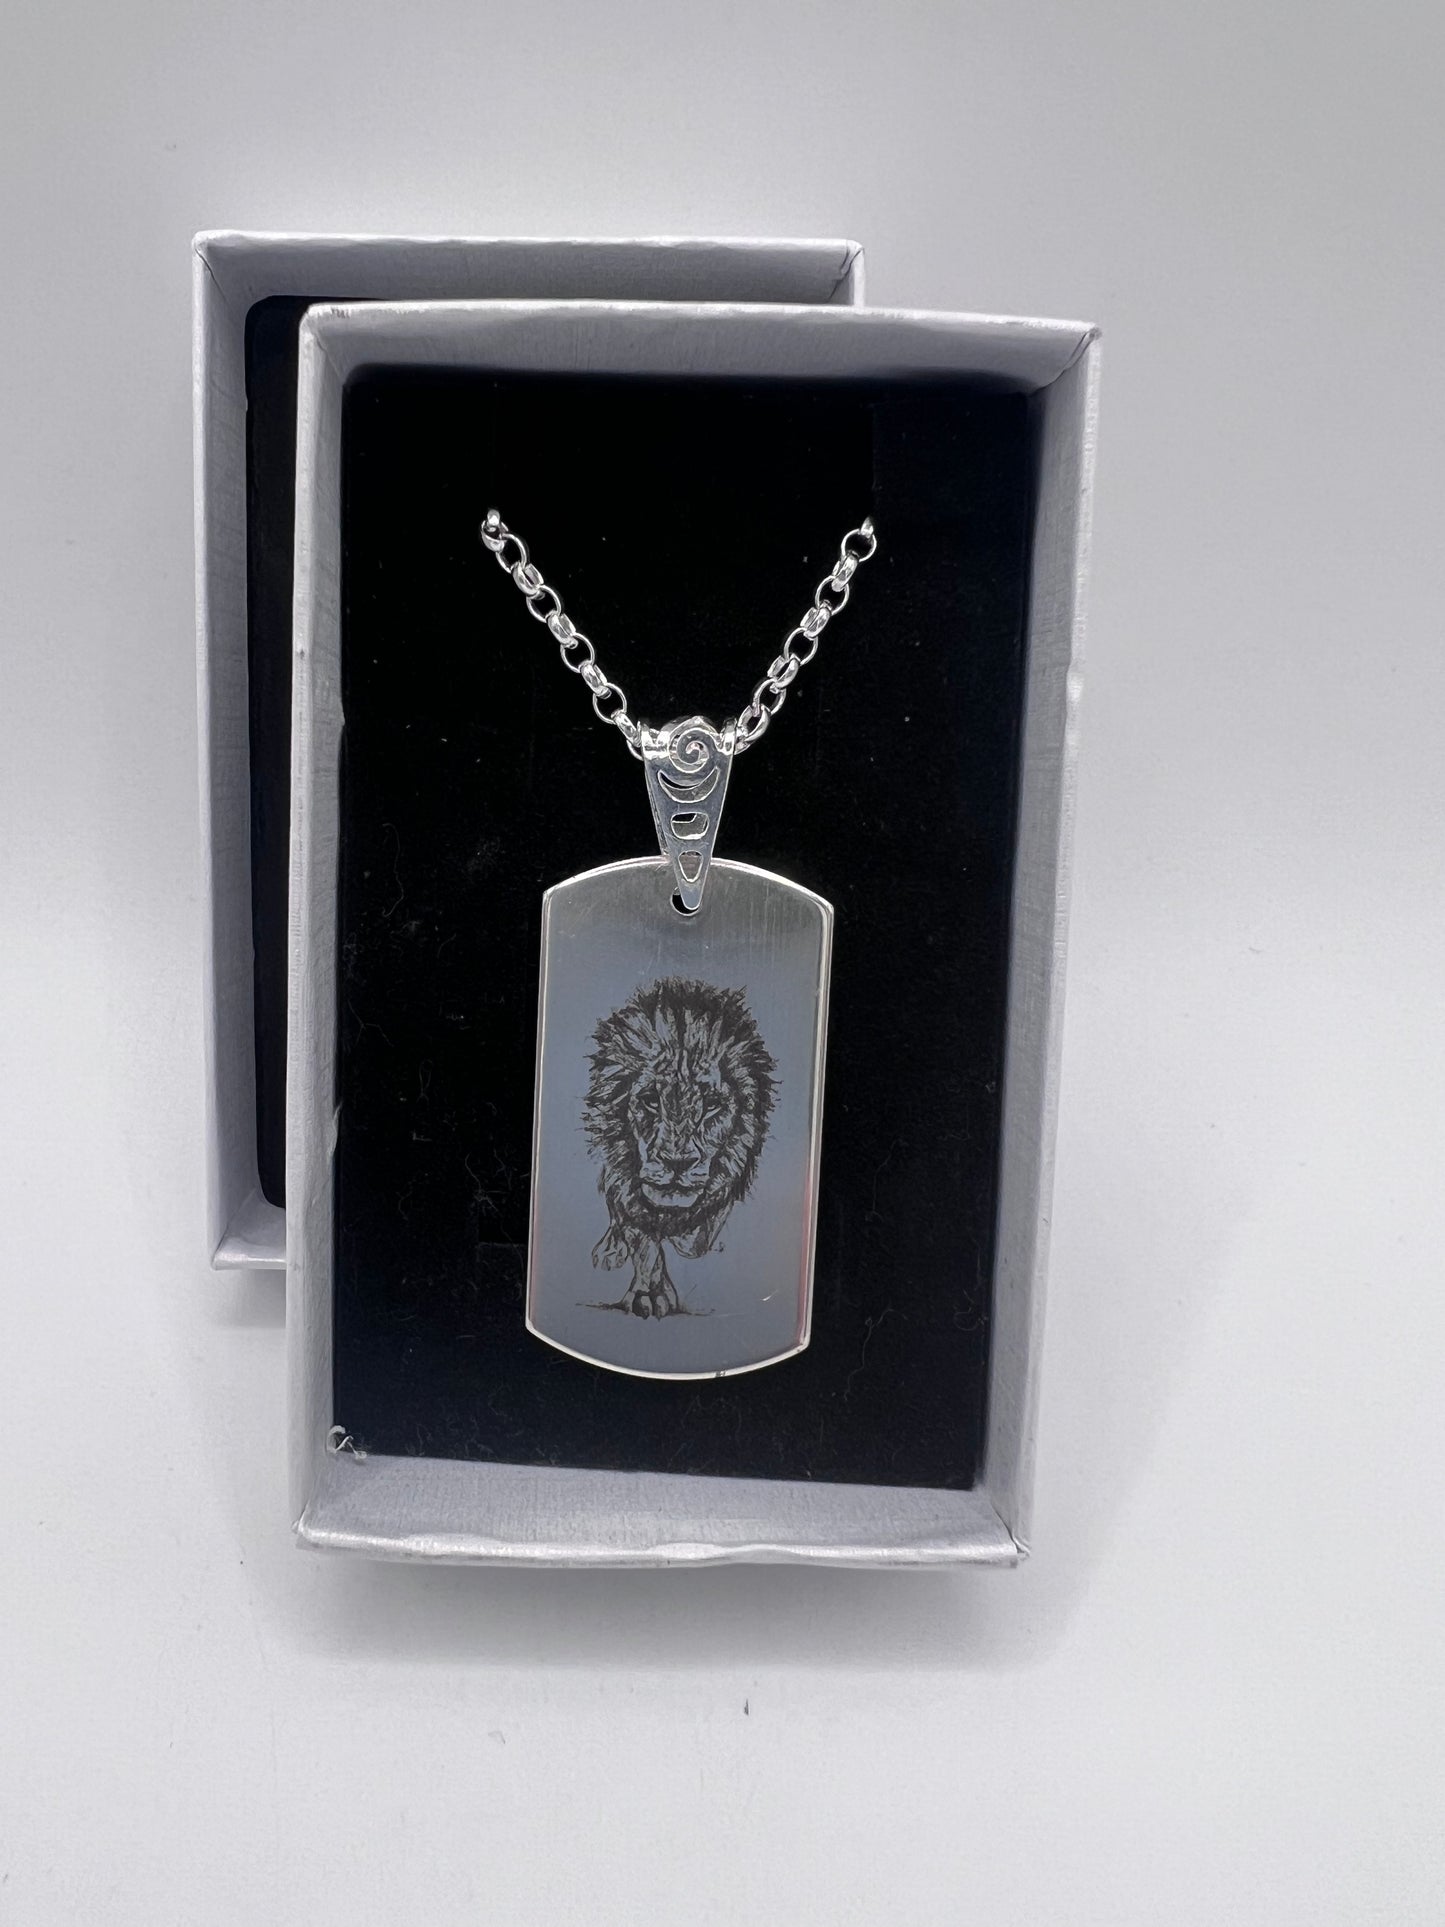 Personalised Gift: Solid Silver Dog Tag, Lion Design, Personalised with Any Message & Solid Silver Belcher Chain